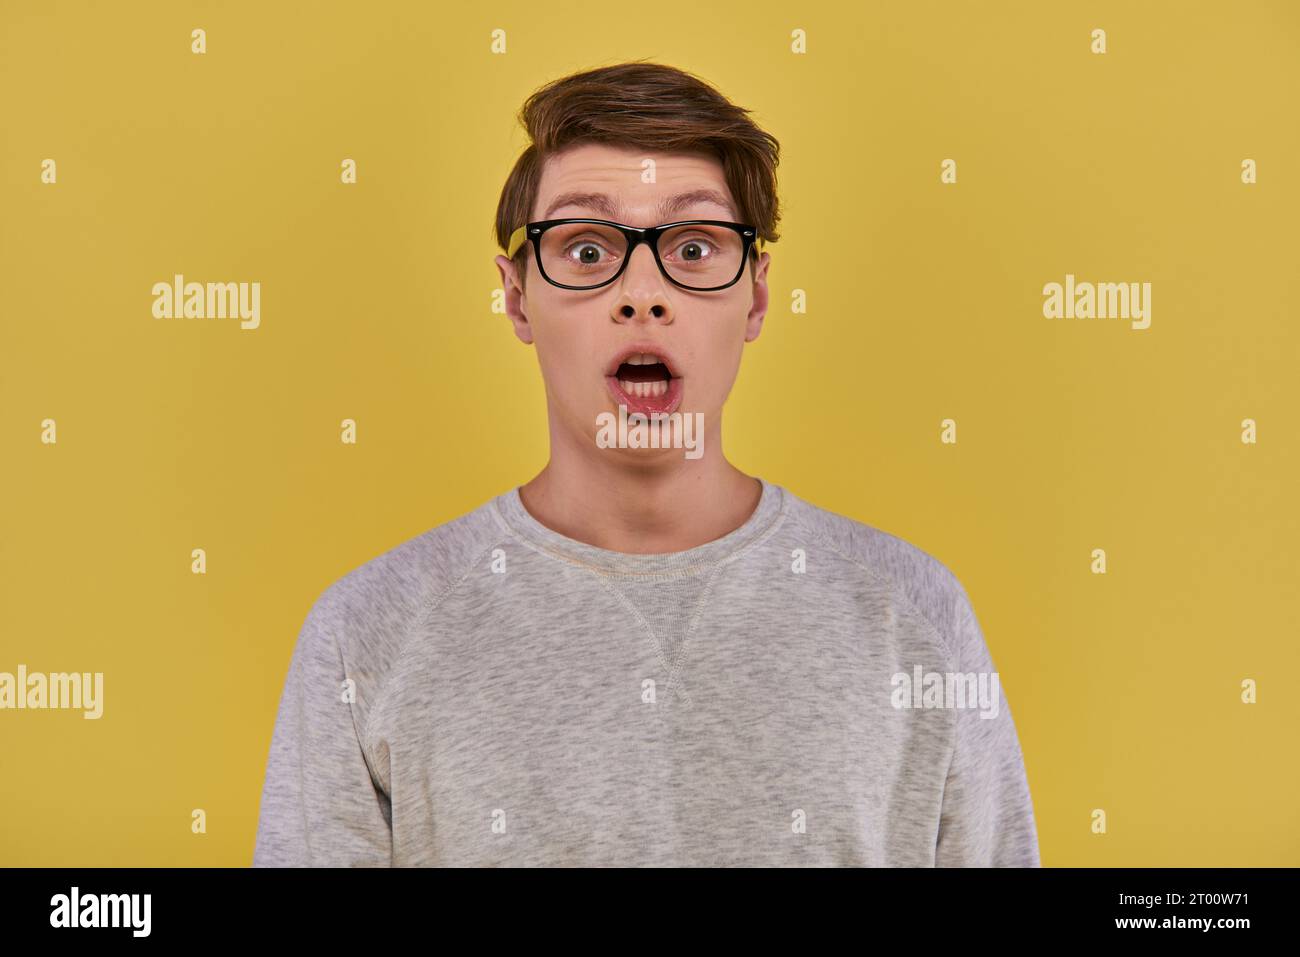 surprised young man in casual comfortable attire and glasses looking at camera with open mouth Stock Photo